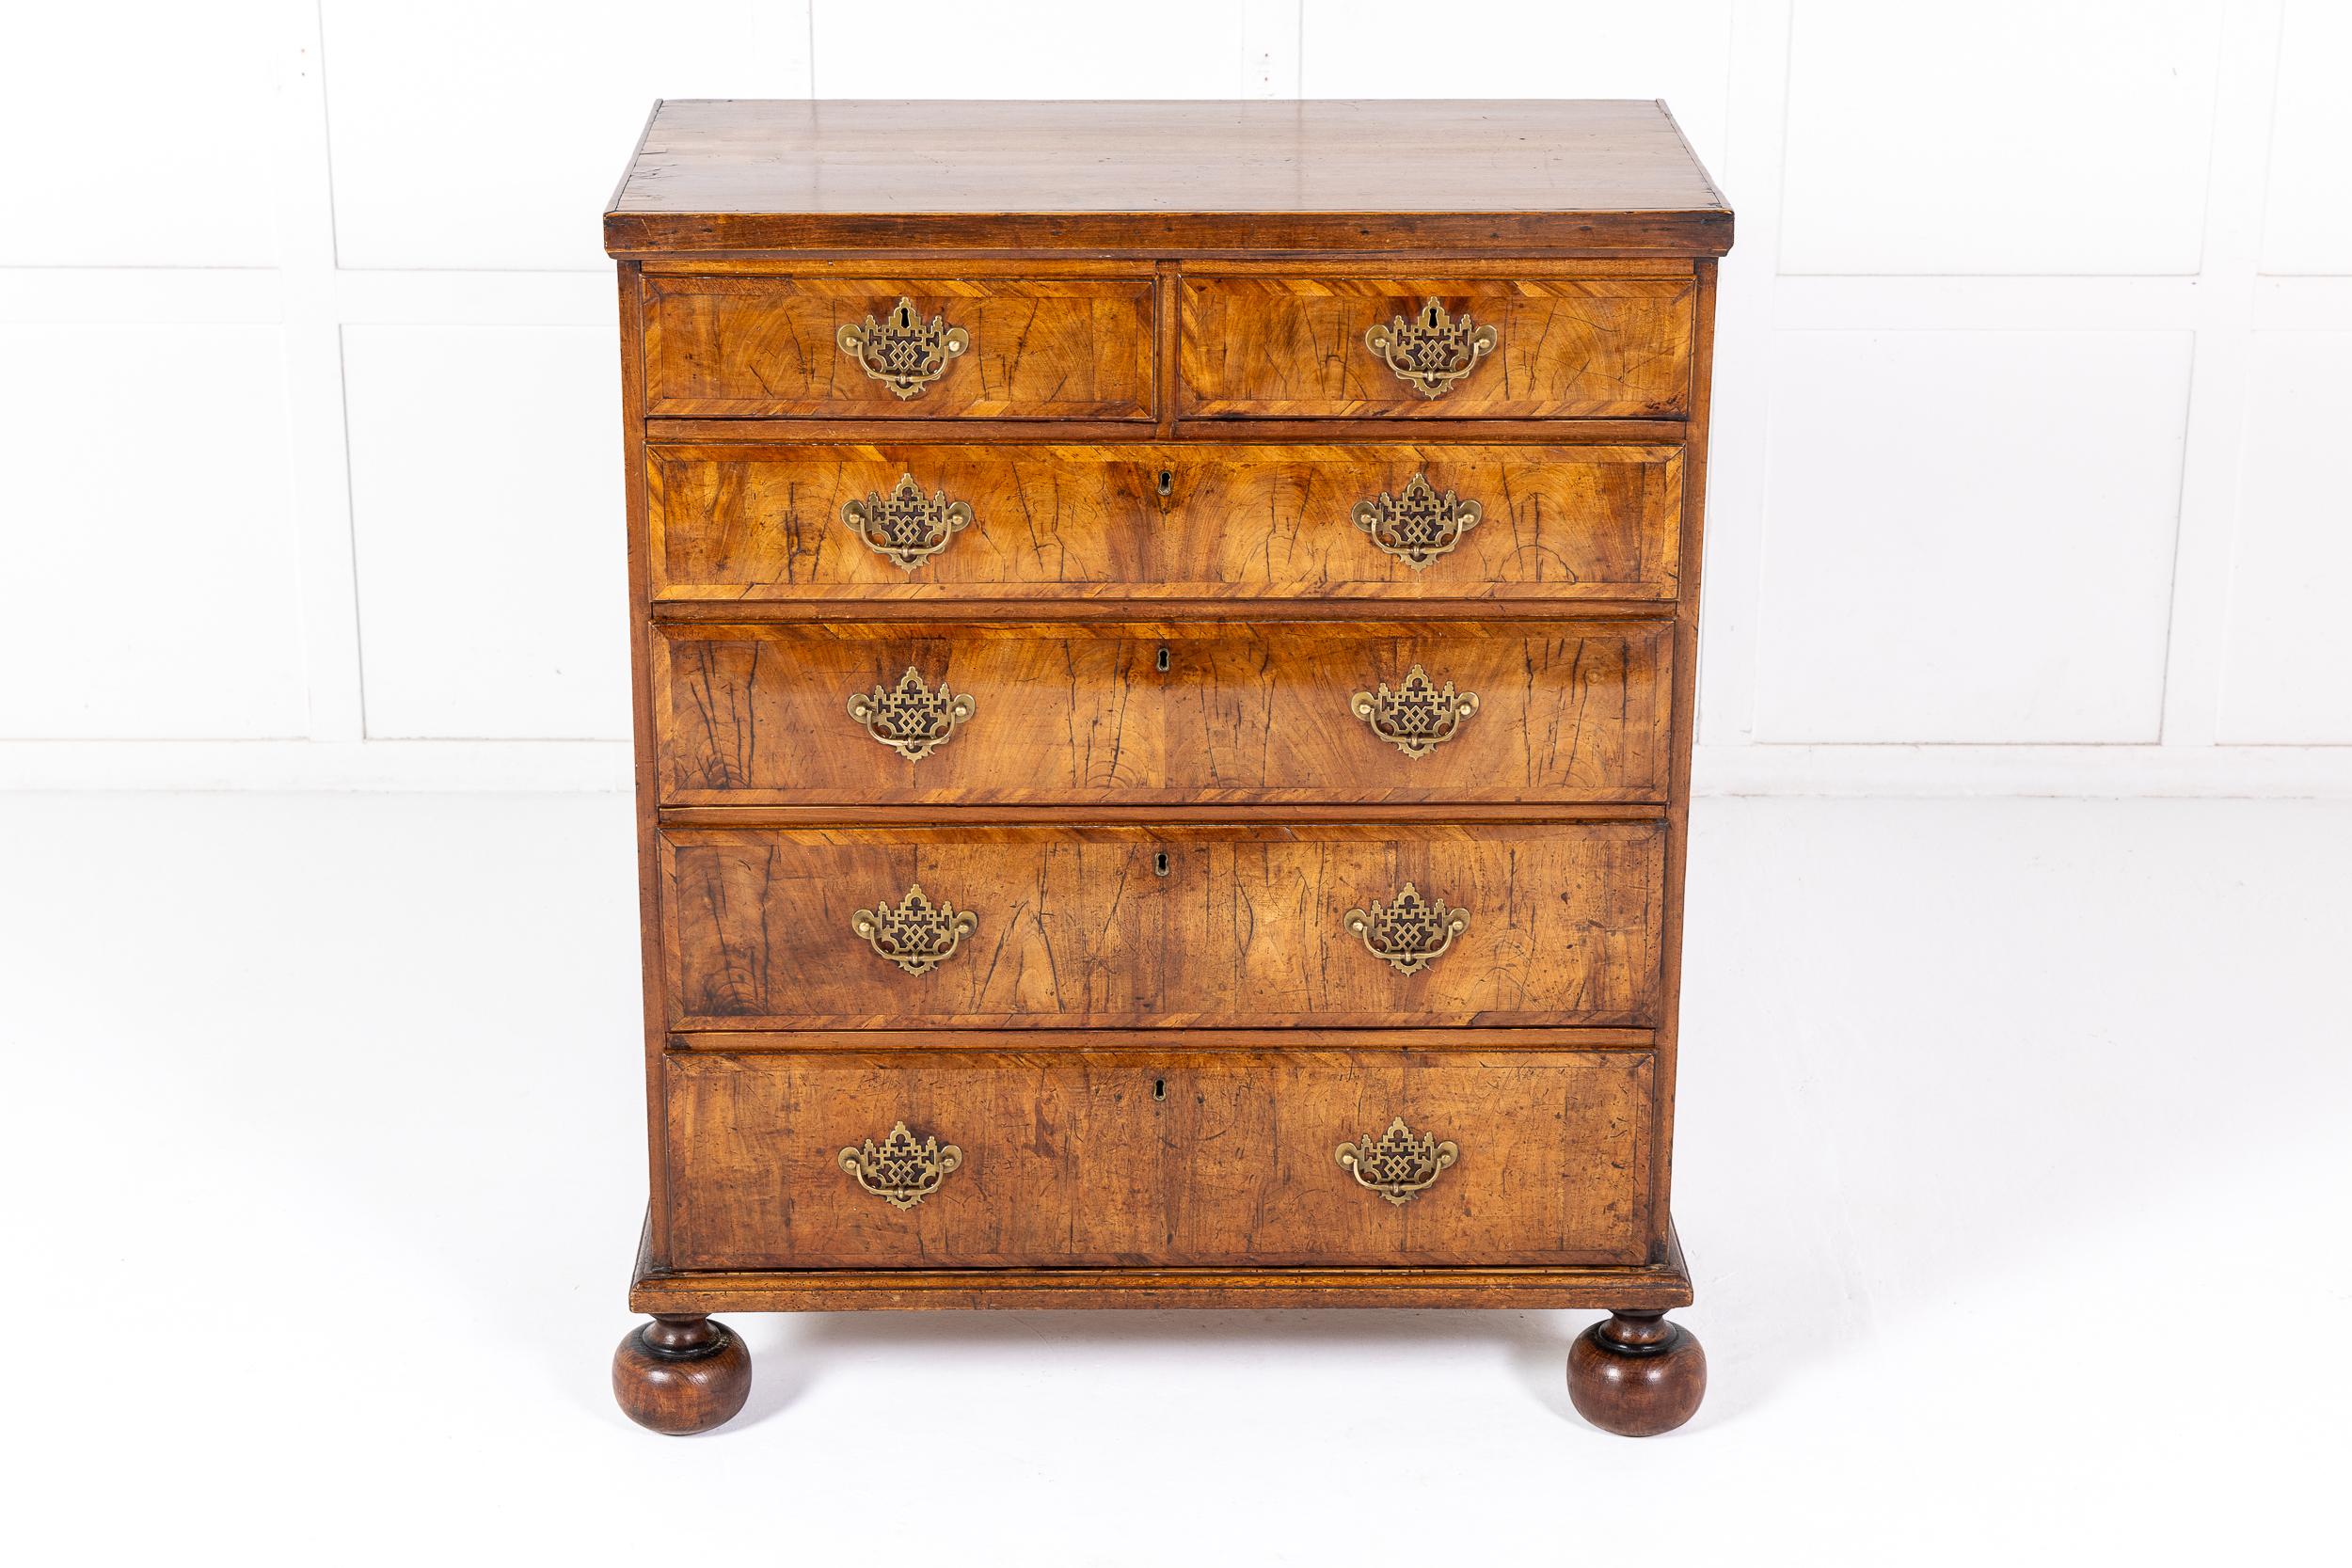 A Good Mid 18th Century English Walnut Chest of Drawers of Unusually Tall and Narrow Proportions.

This chest has an unusual drawer configuration with two short drawers over four graduated longer ones each with fine and large brass plate handles.